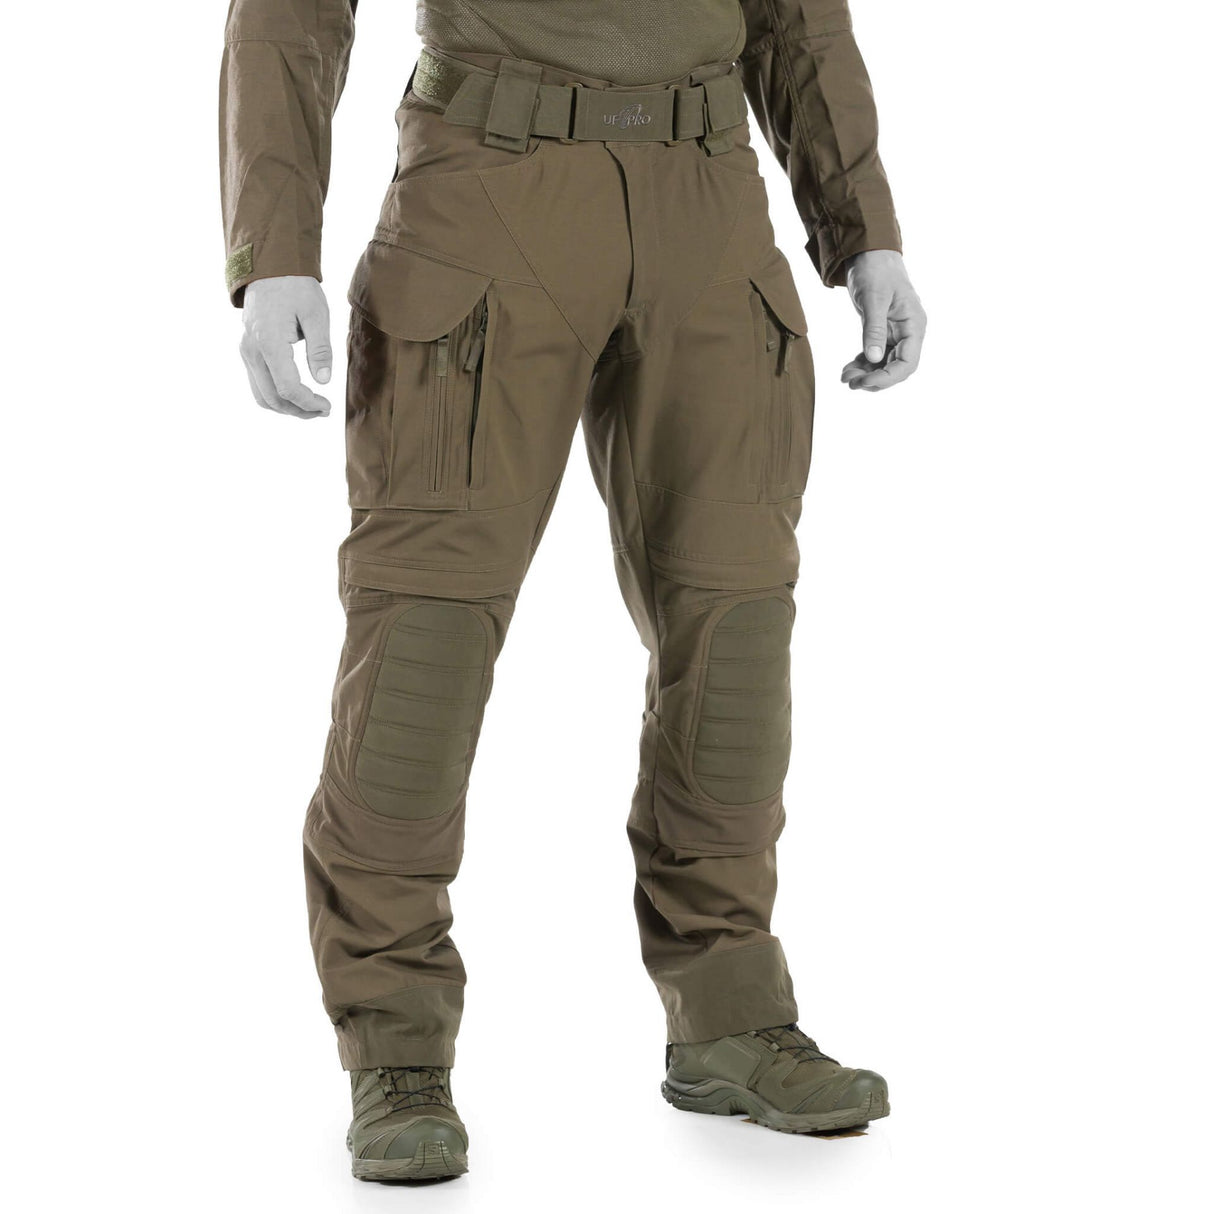 Military Urban Tactical SWAT Combat Pants Outdoor Special Forces